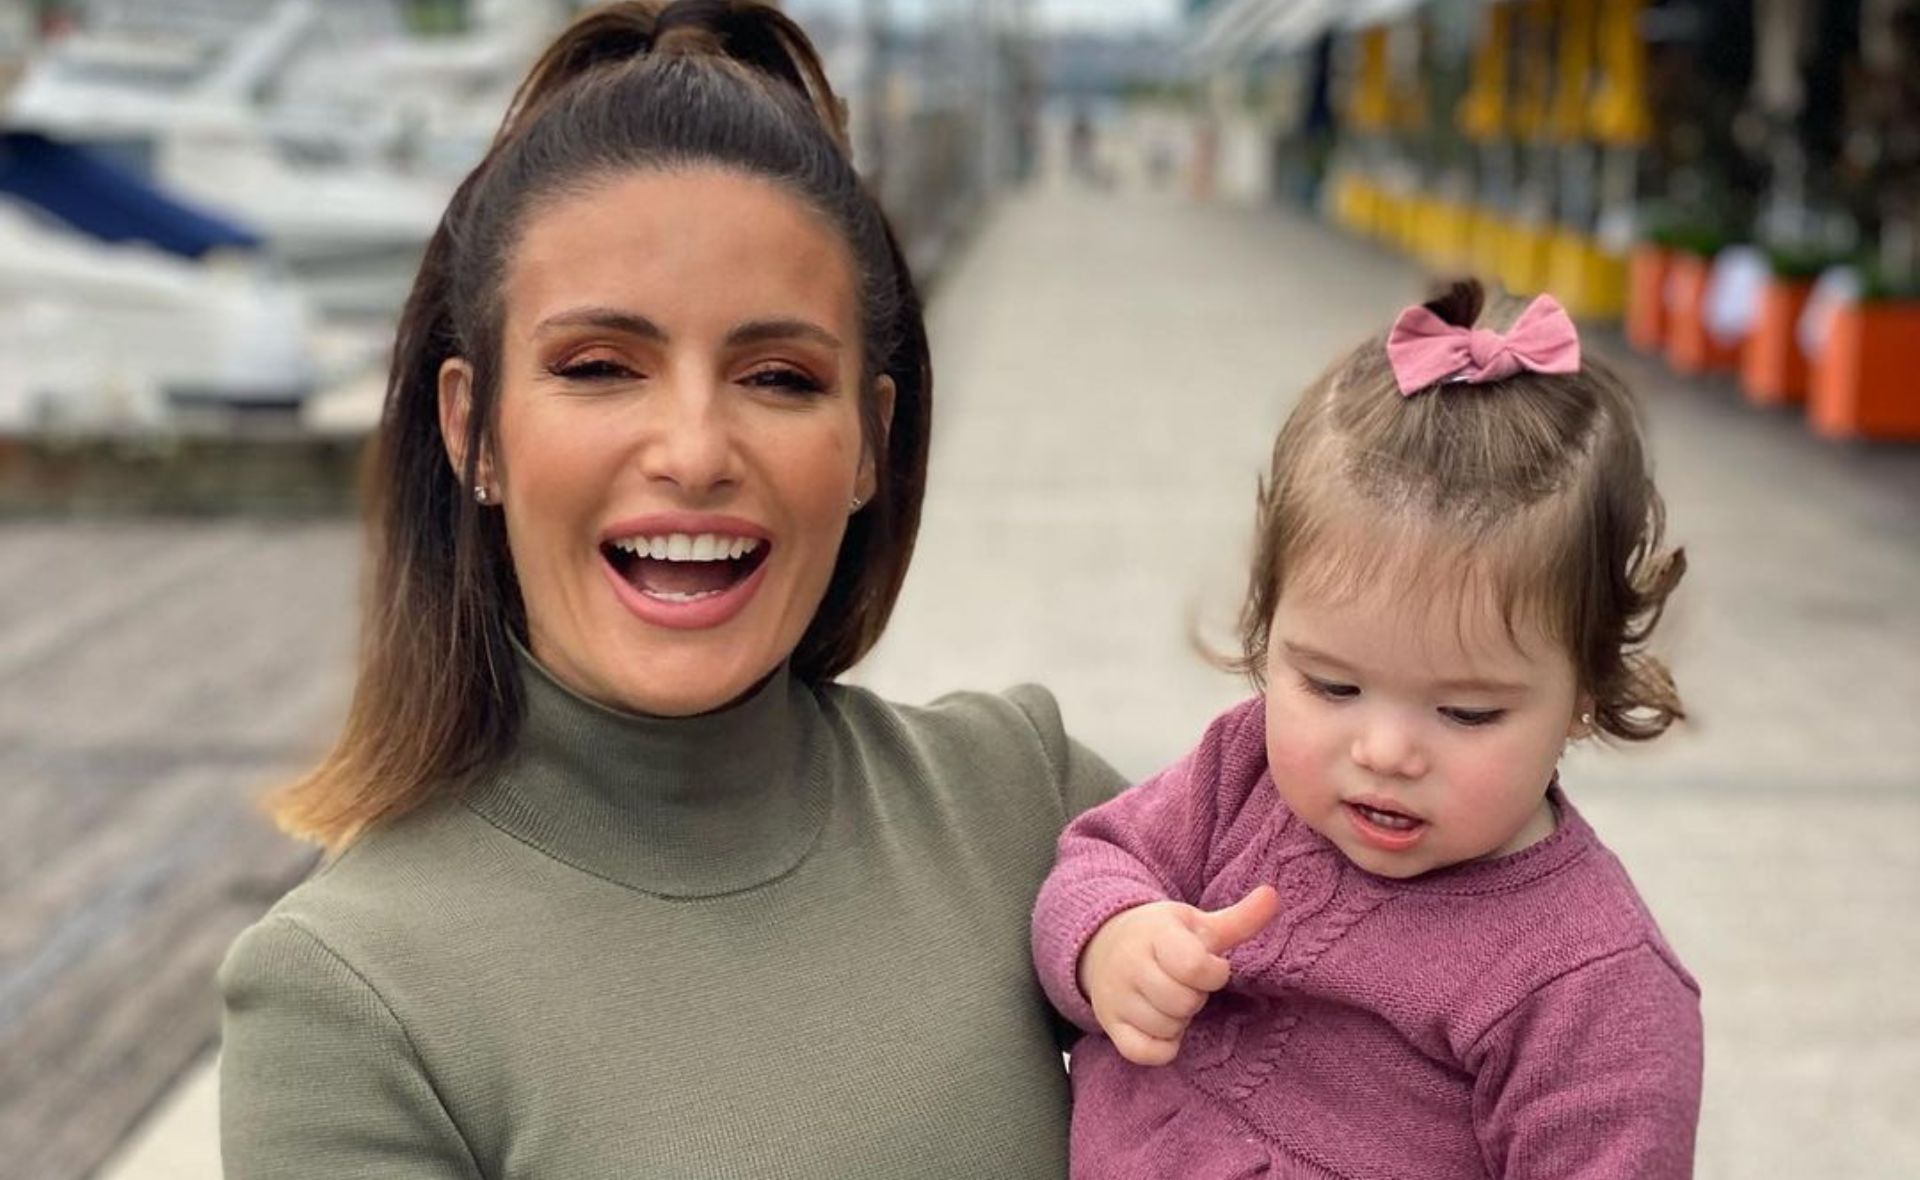 Home and Away’s Ada Nicodemou is fulfilling her godmother duties in adorable tribute